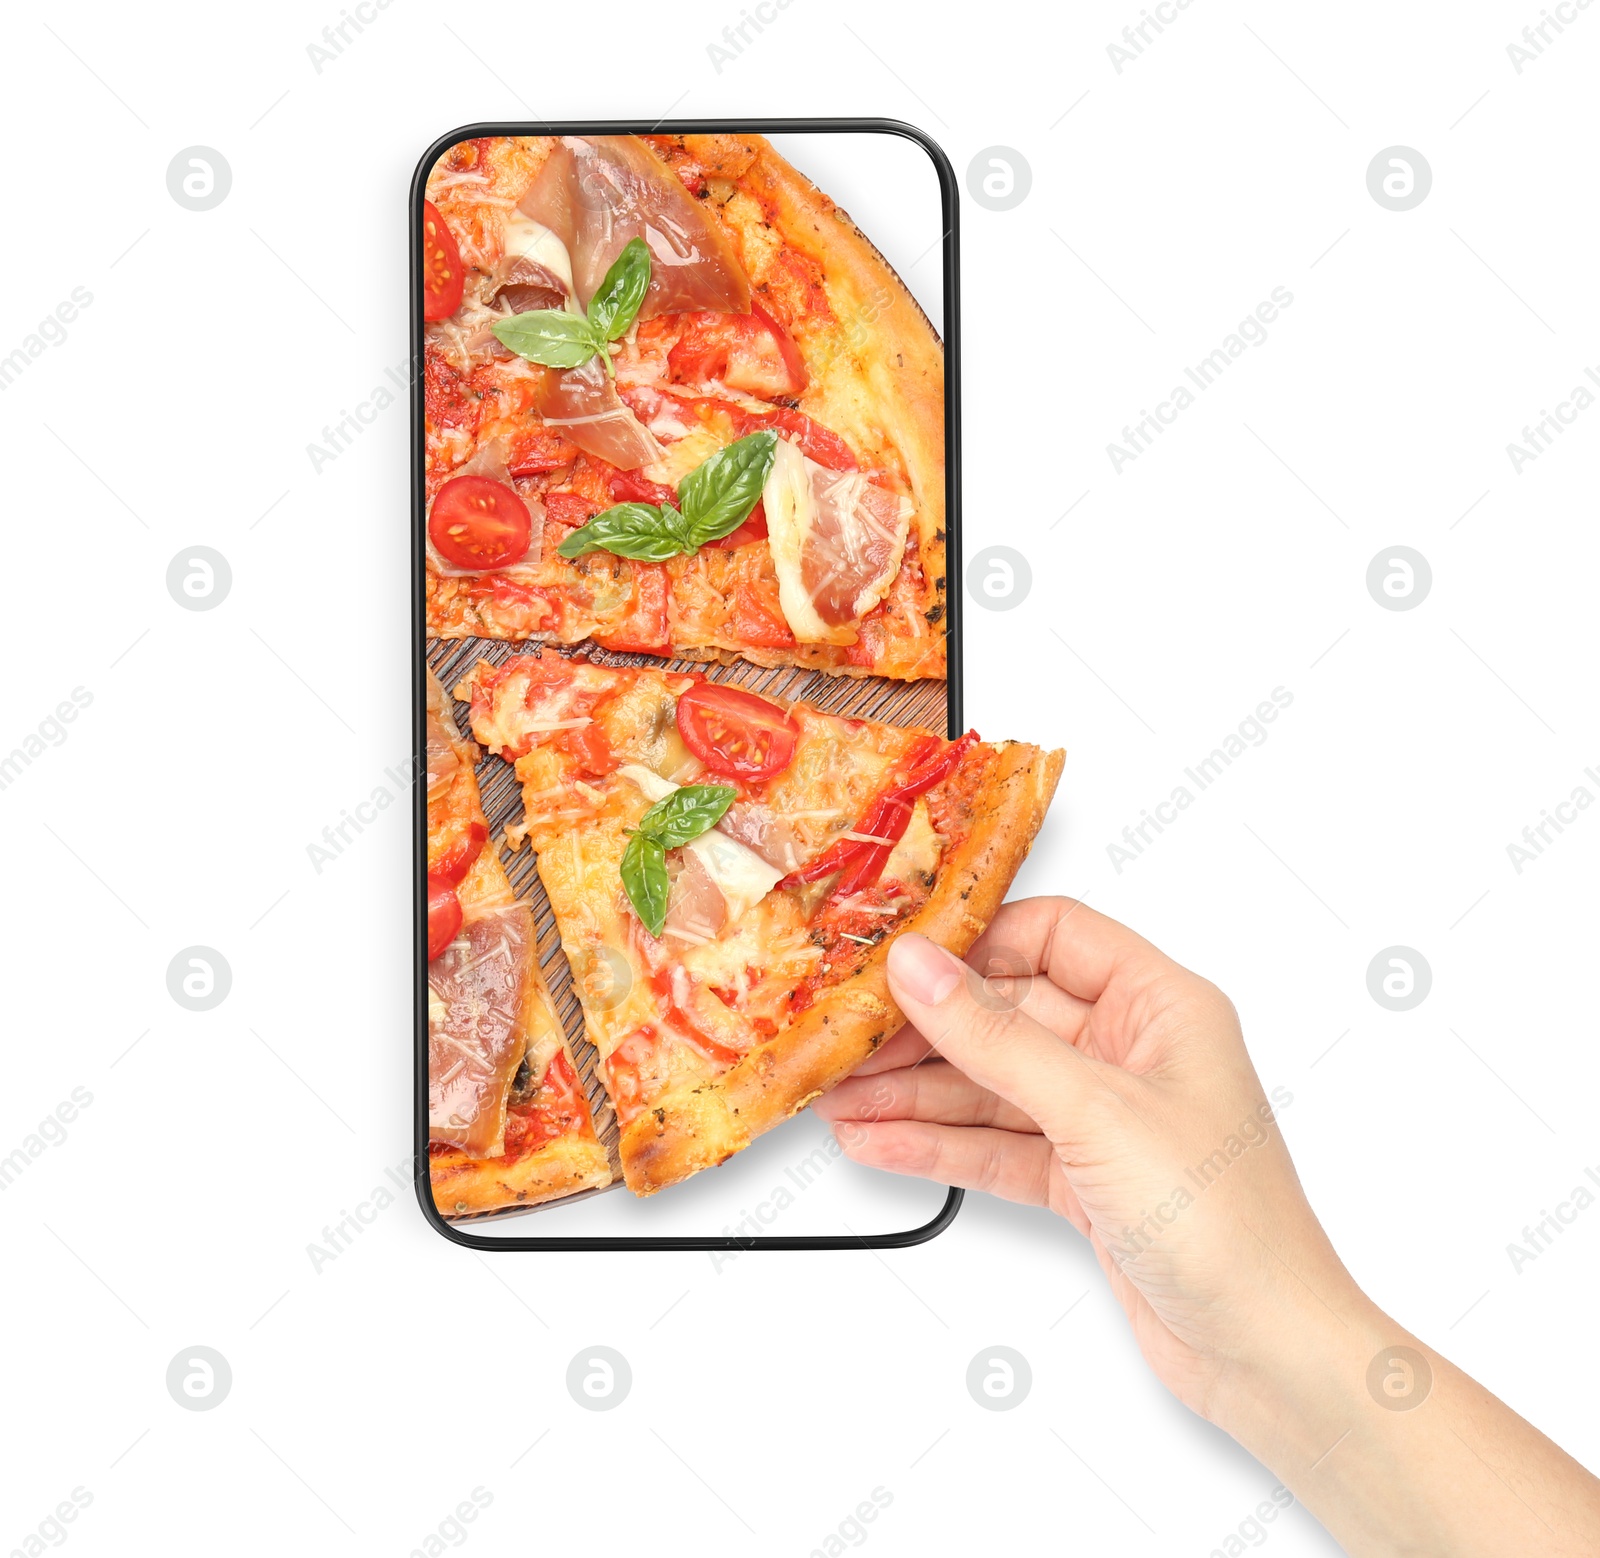 Image of Online food ordering. Woman taking slice of pizza from smartphone screen against white background, closeup